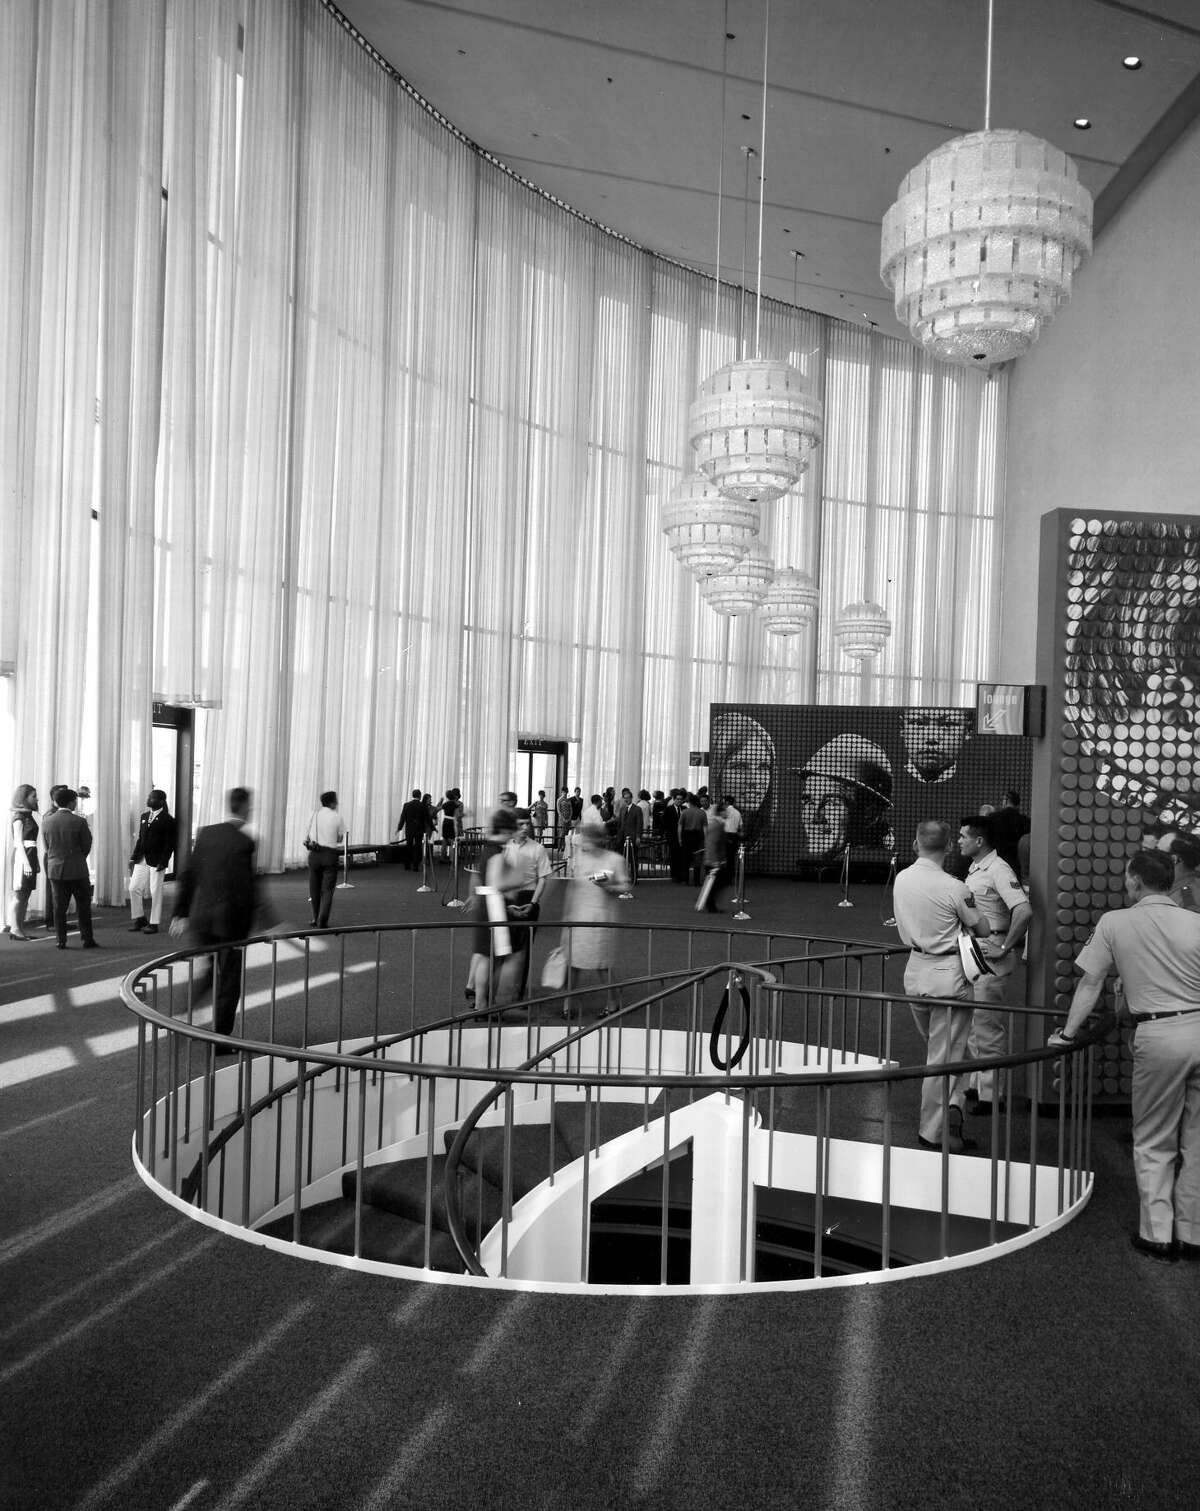 During HemisFair in 1968, the Confluence Theater in the United States Pavilion, now known as the John H. Wood Federal Courthouse, was creatively decorated with large displays.